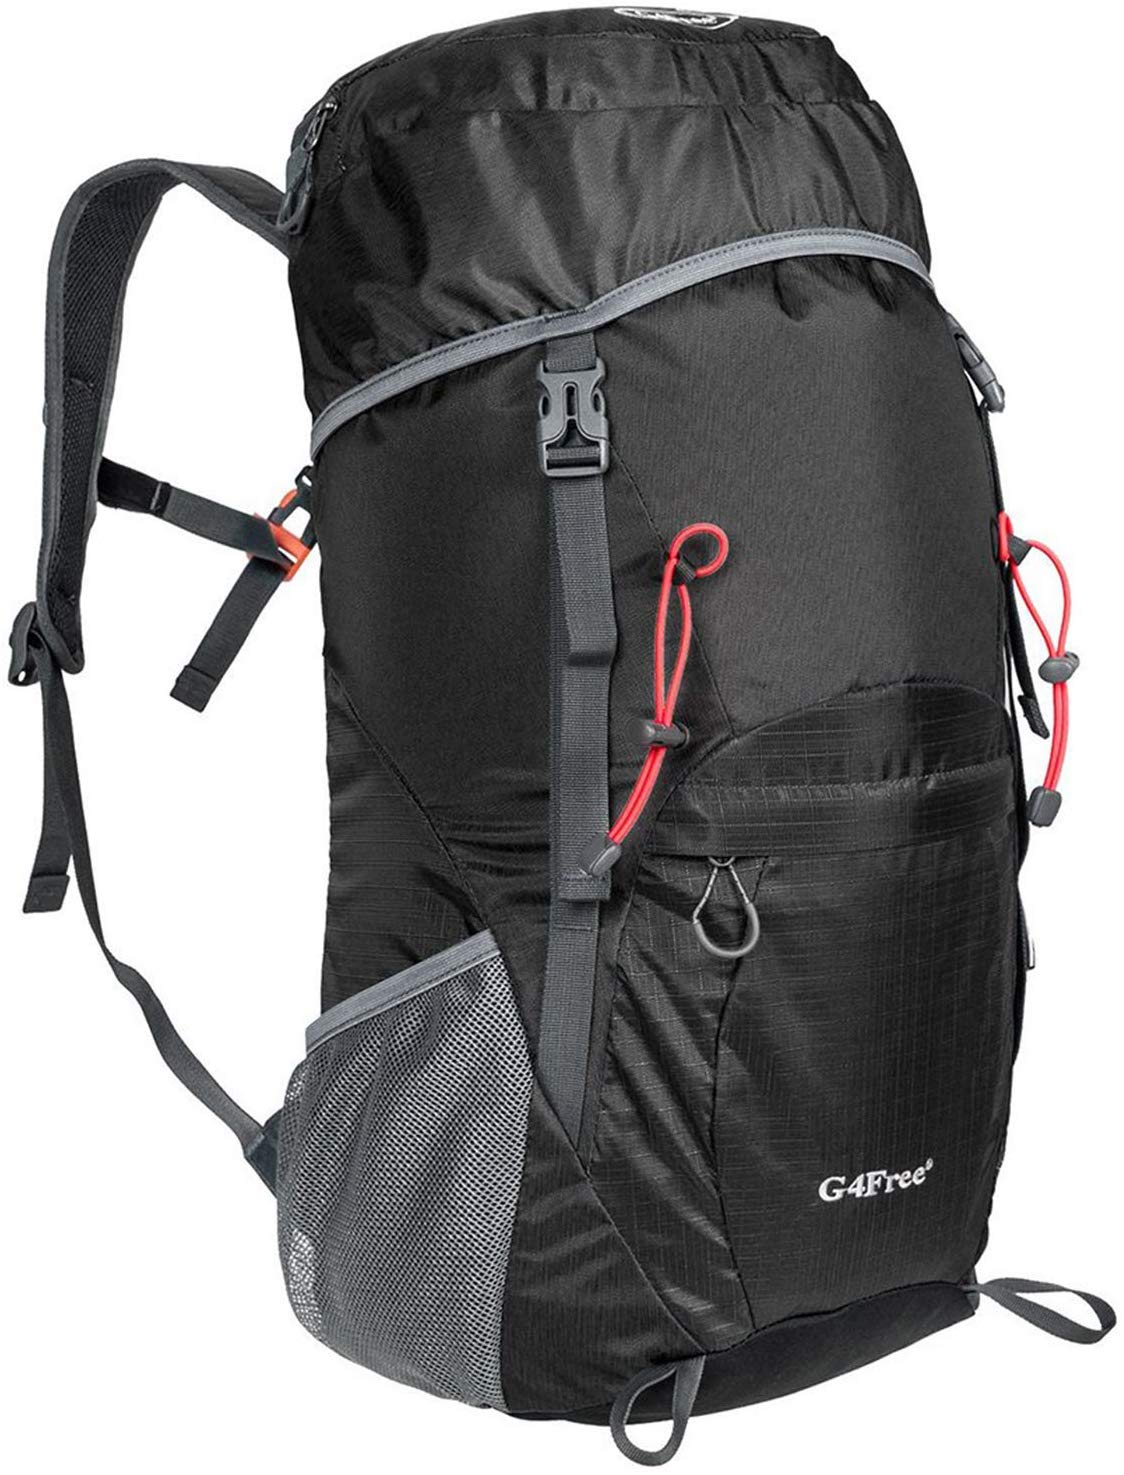 G4Free Lightweight Packable Hiking Backpack